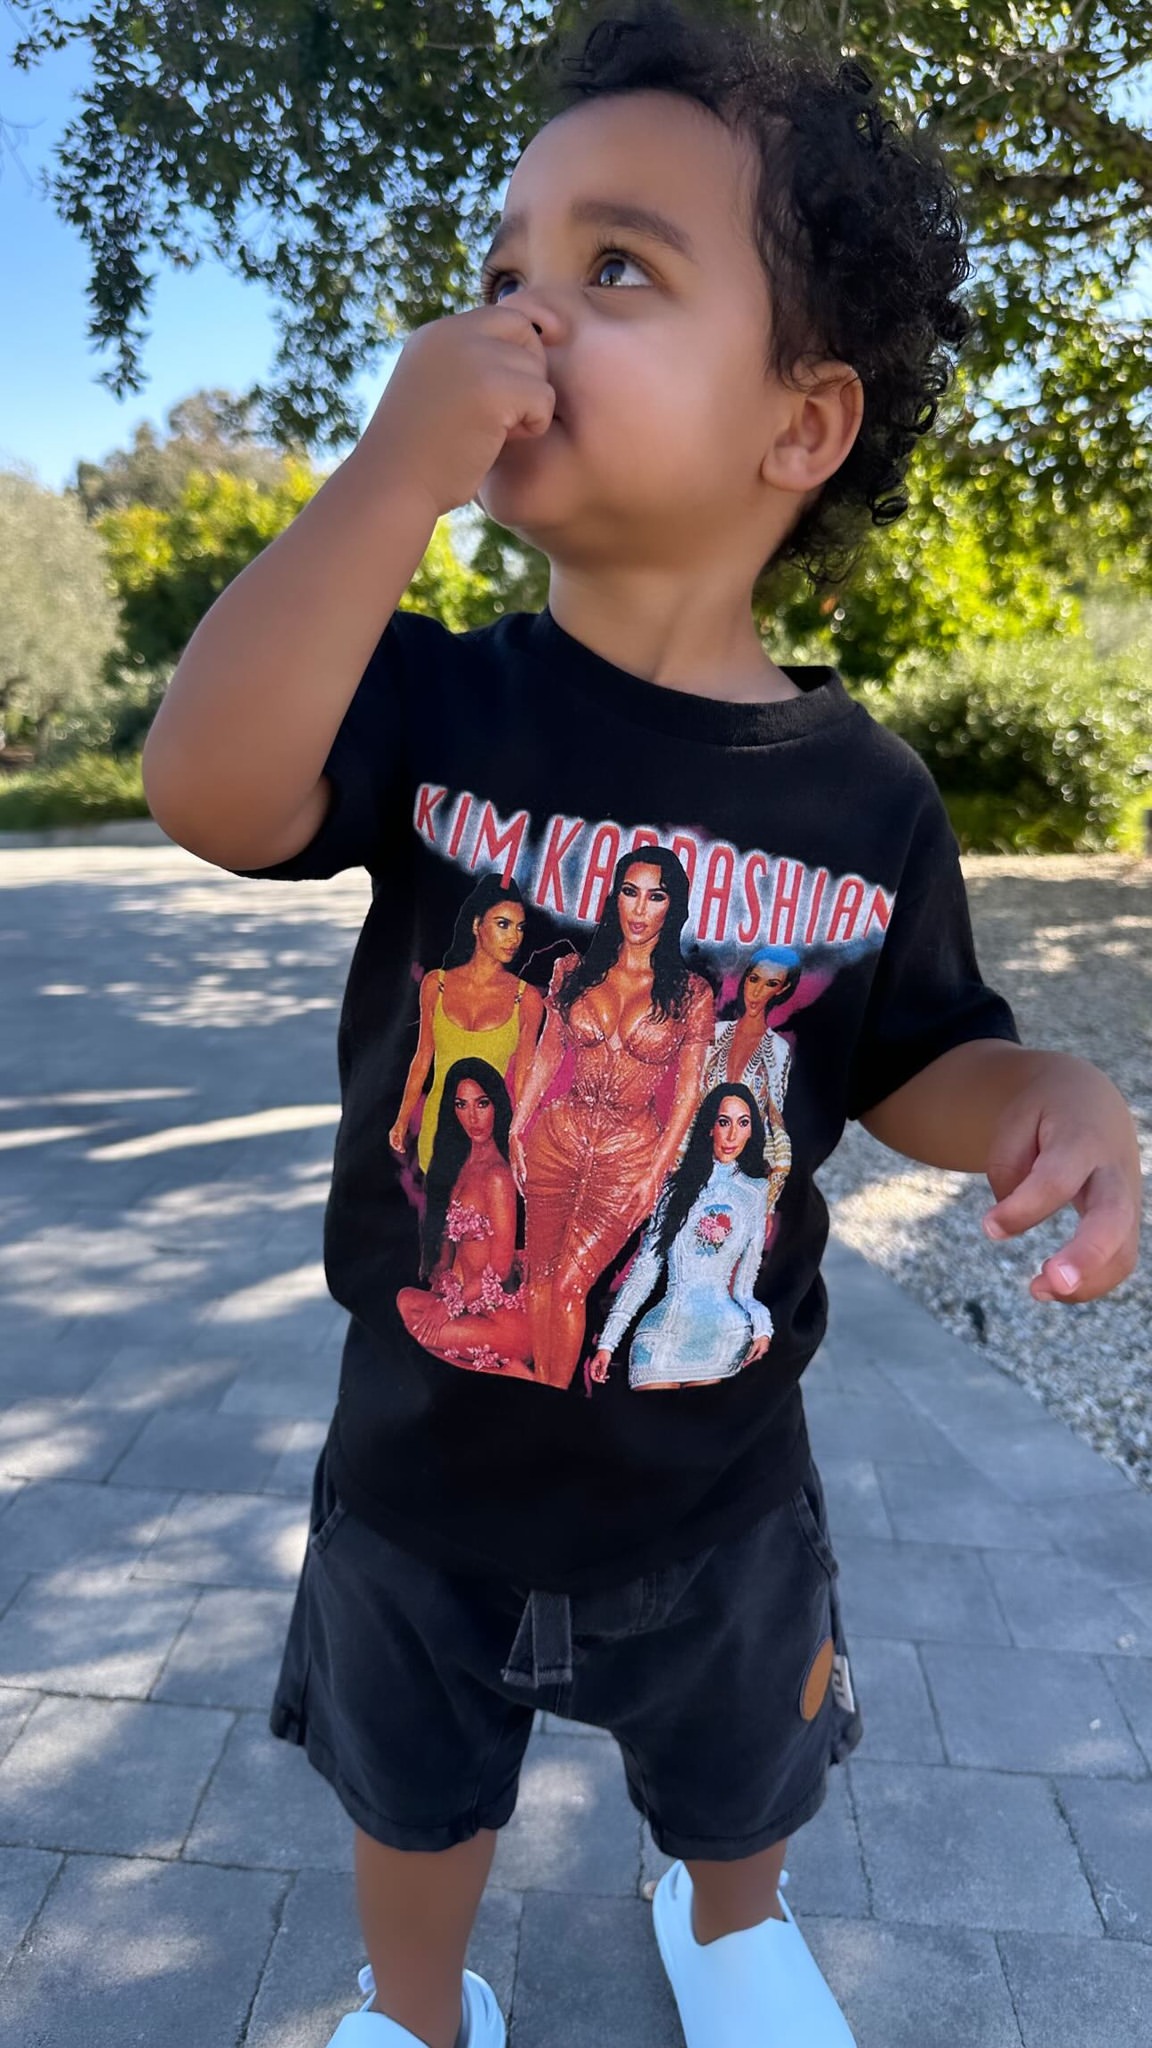 In the Instagram photo, Tatum Thompson wore a T-shirt with images of aunt Kim Kardashian